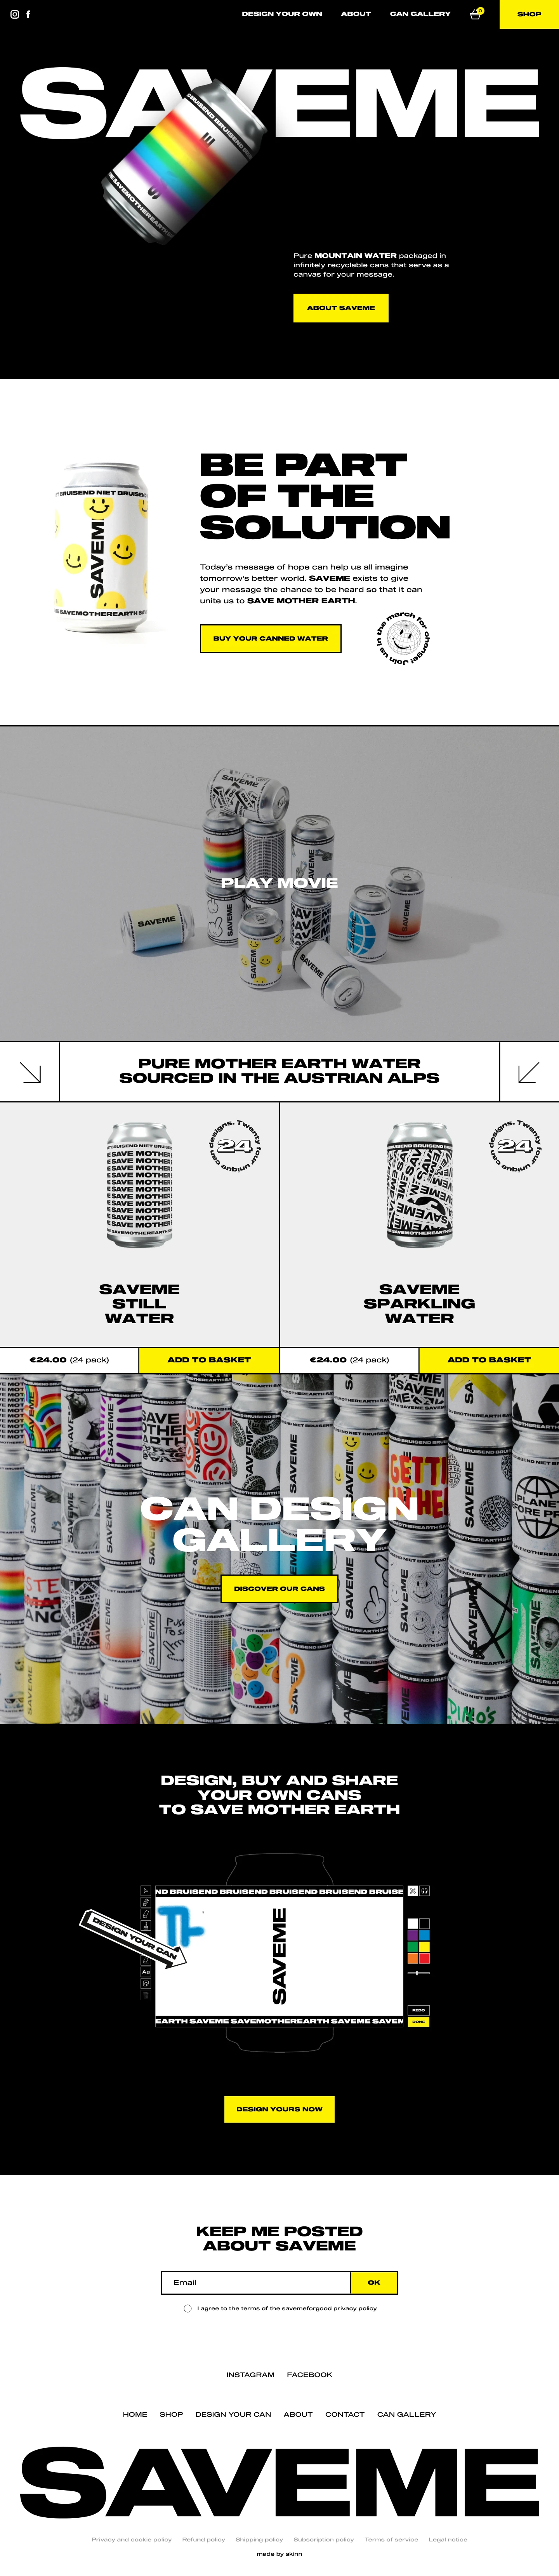 SAVEME Landing Page Example: Be part of the solution, not the pollution. SAVEME exists to give your words the chance to be heard. Our pure mountain water is packaged in recyclable cans that serve as a canvas for your message. What's your message?